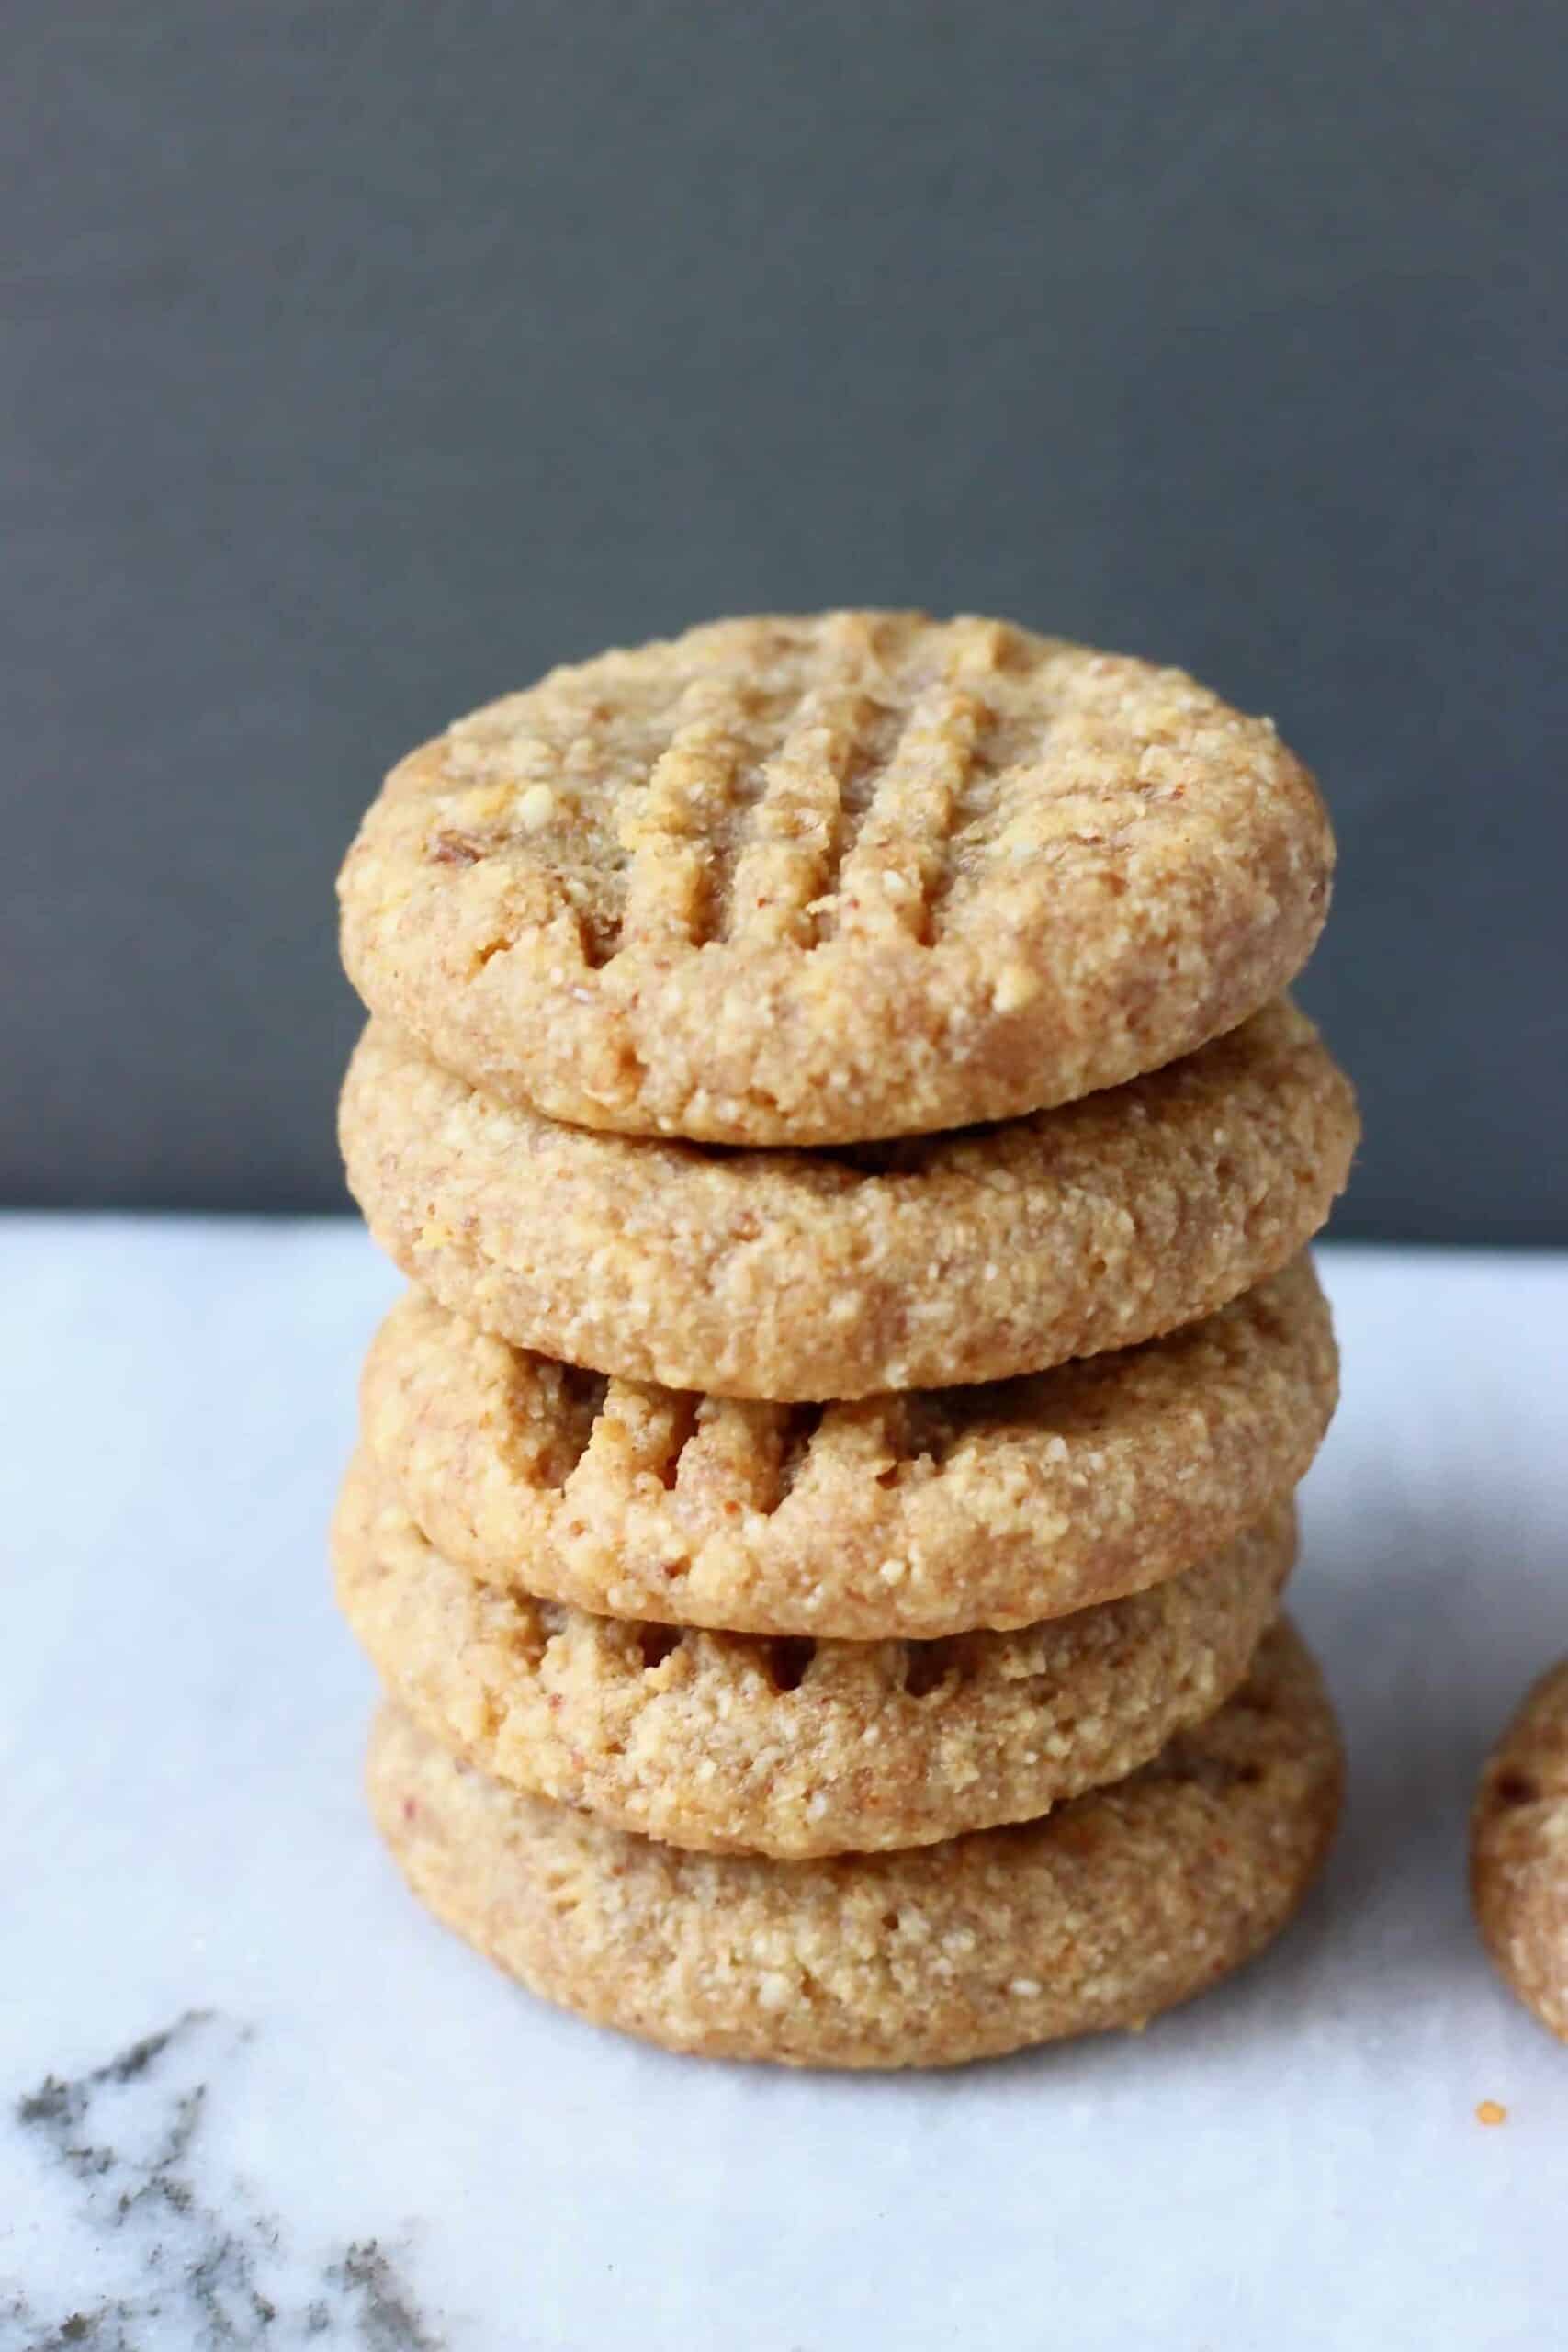 Photo of a stack of five peanut butter cookies on a marble slab against a grey background